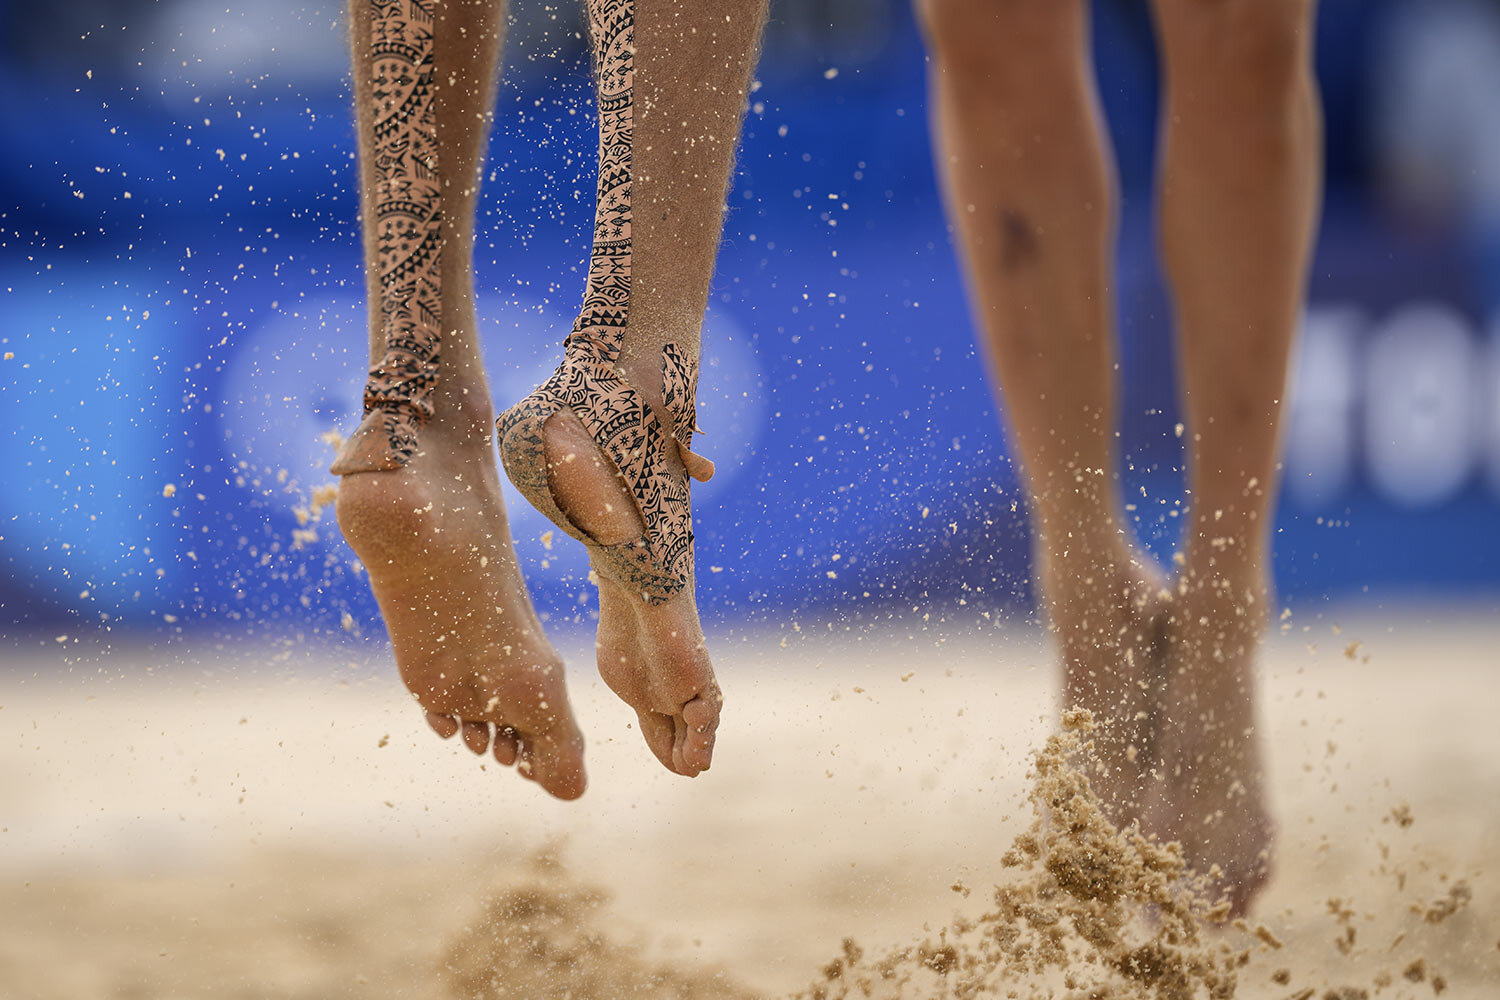  Konstantin Semenov, left, of the Russian Olympic Committee, with tape on his feet jumps during a men's beach volleyball match against Australia at the 2020 Summer Olympics, Monday, July 26, 2021, in Tokyo, Japan. (AP Photo/Petros Giannakouris) 